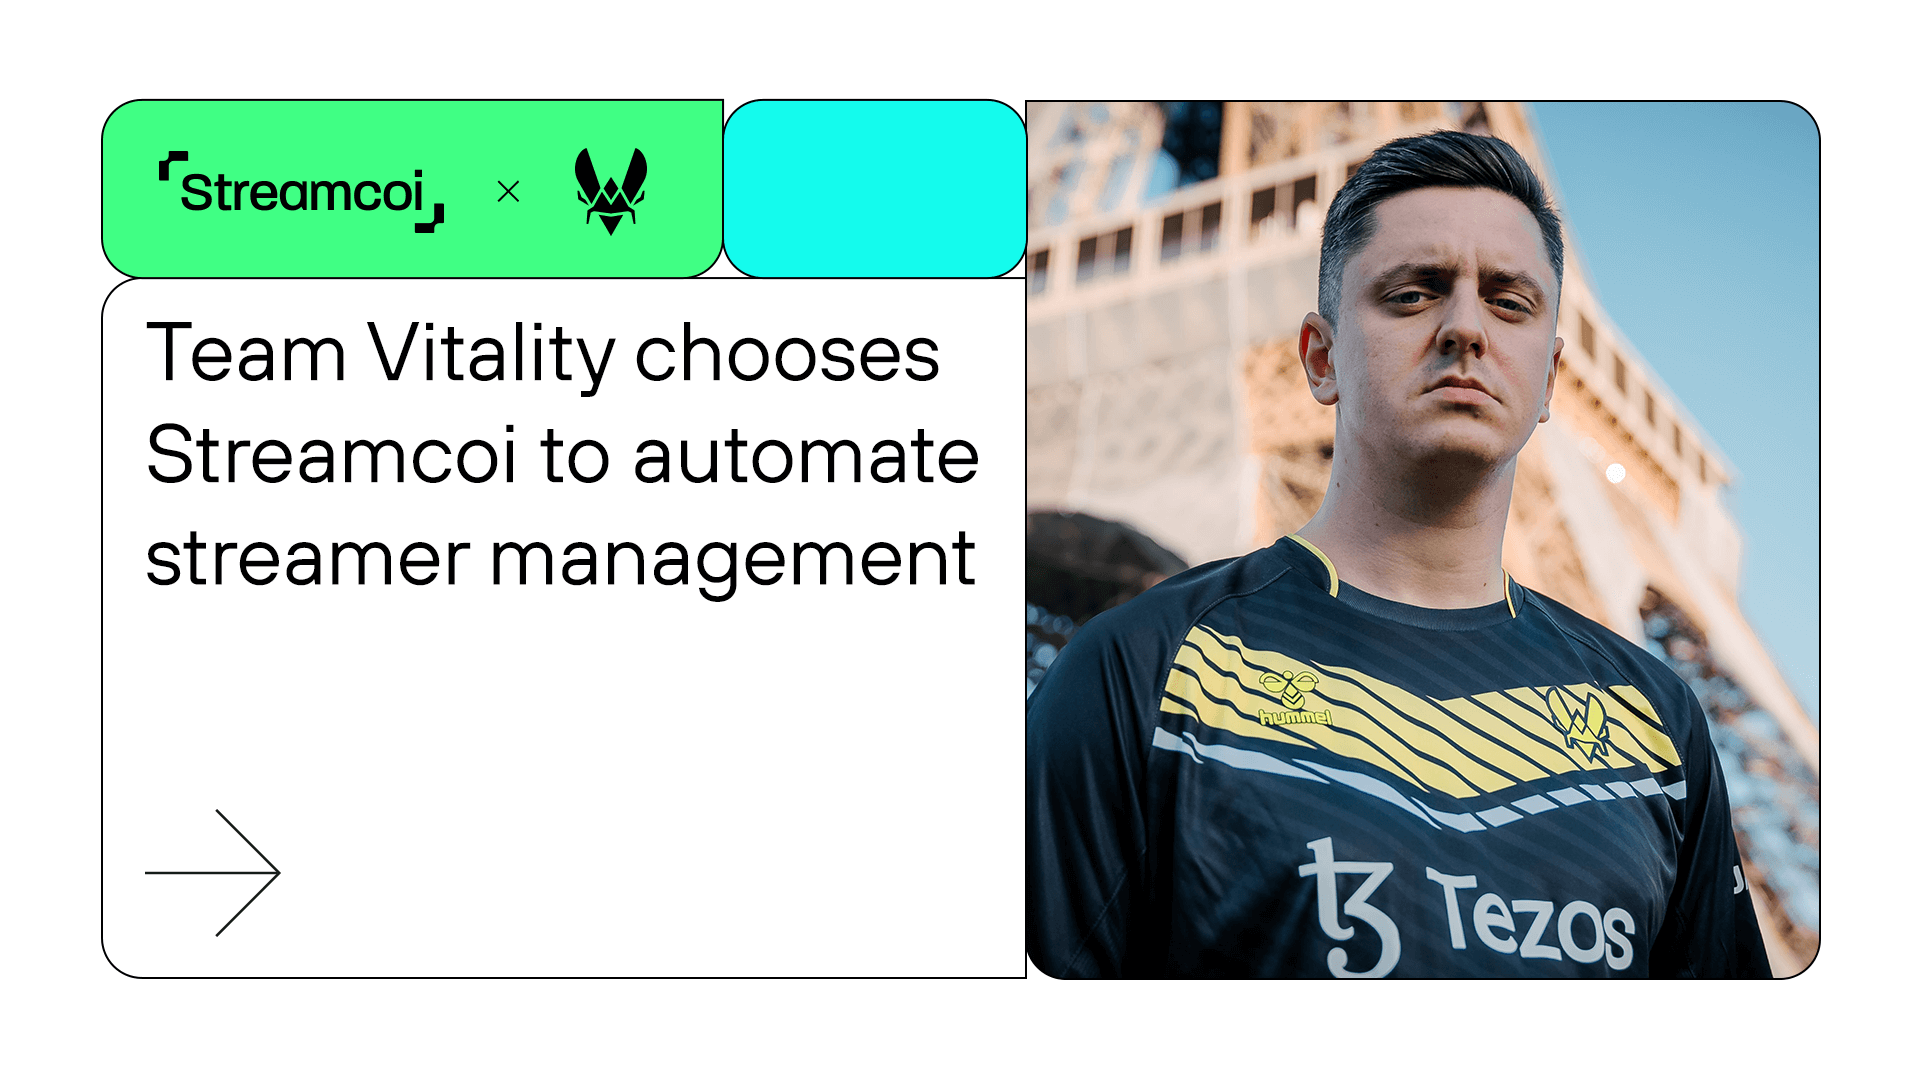 Team Vitality chooses Streamcoi to automate Twitch streamer management and maximise visibility for its partners